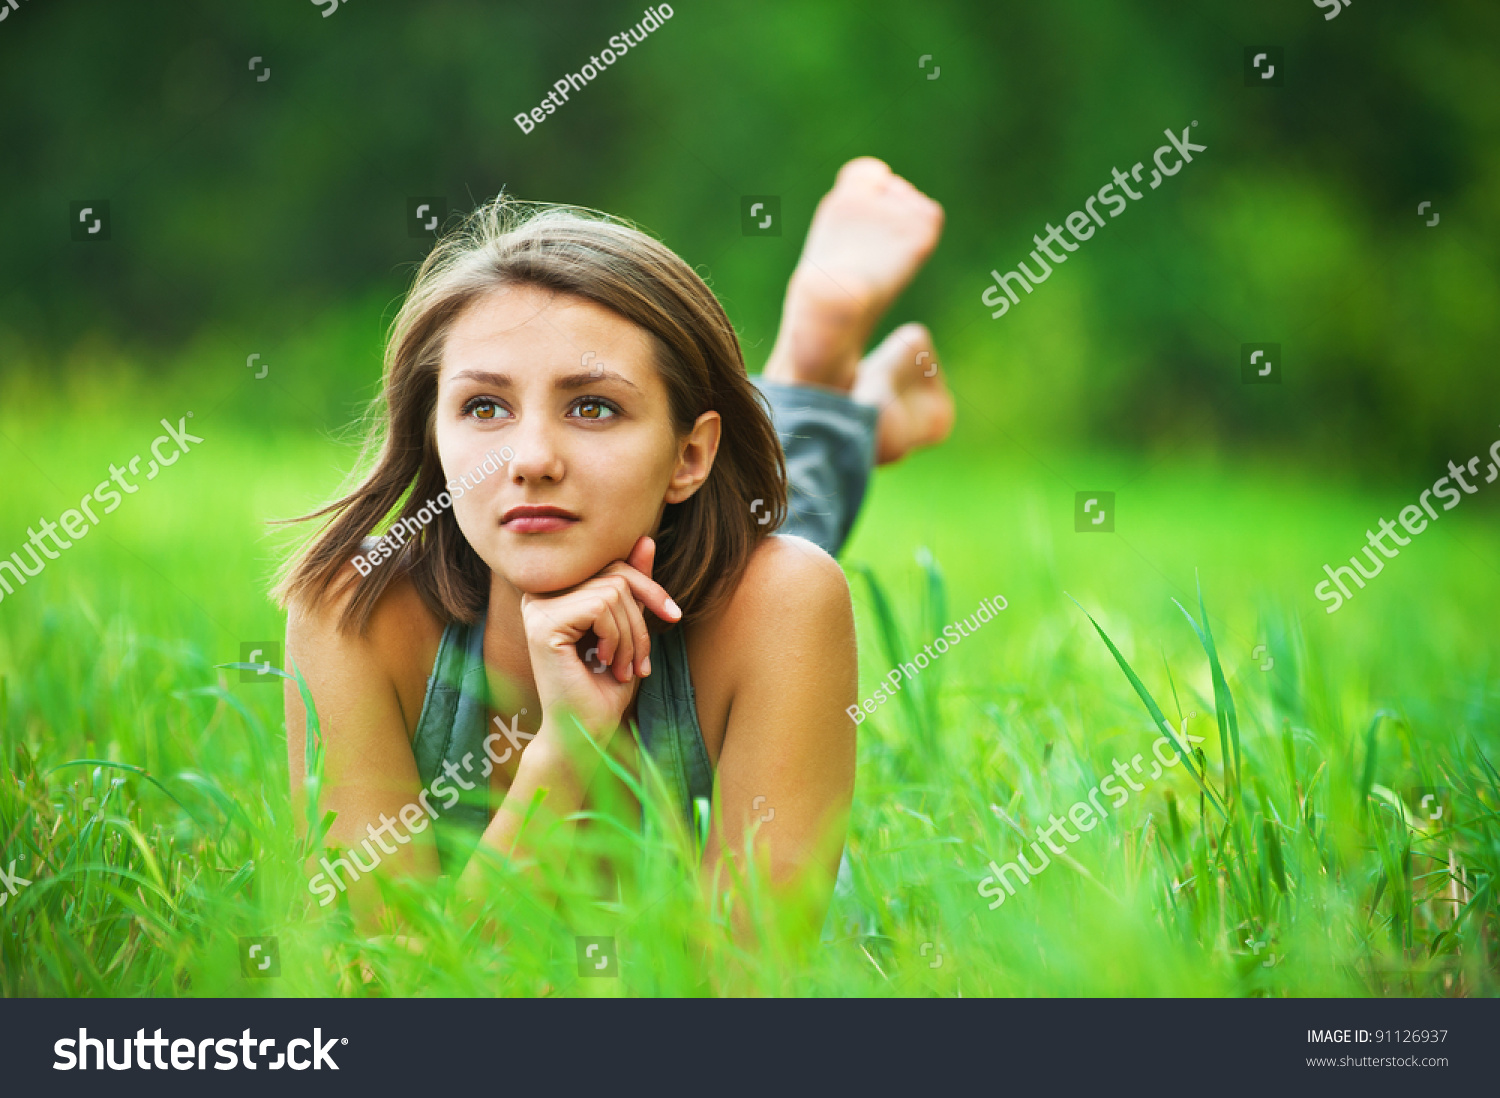 Portrait Of Romantic Young Woman With Short Hair Lying On Green Grass 